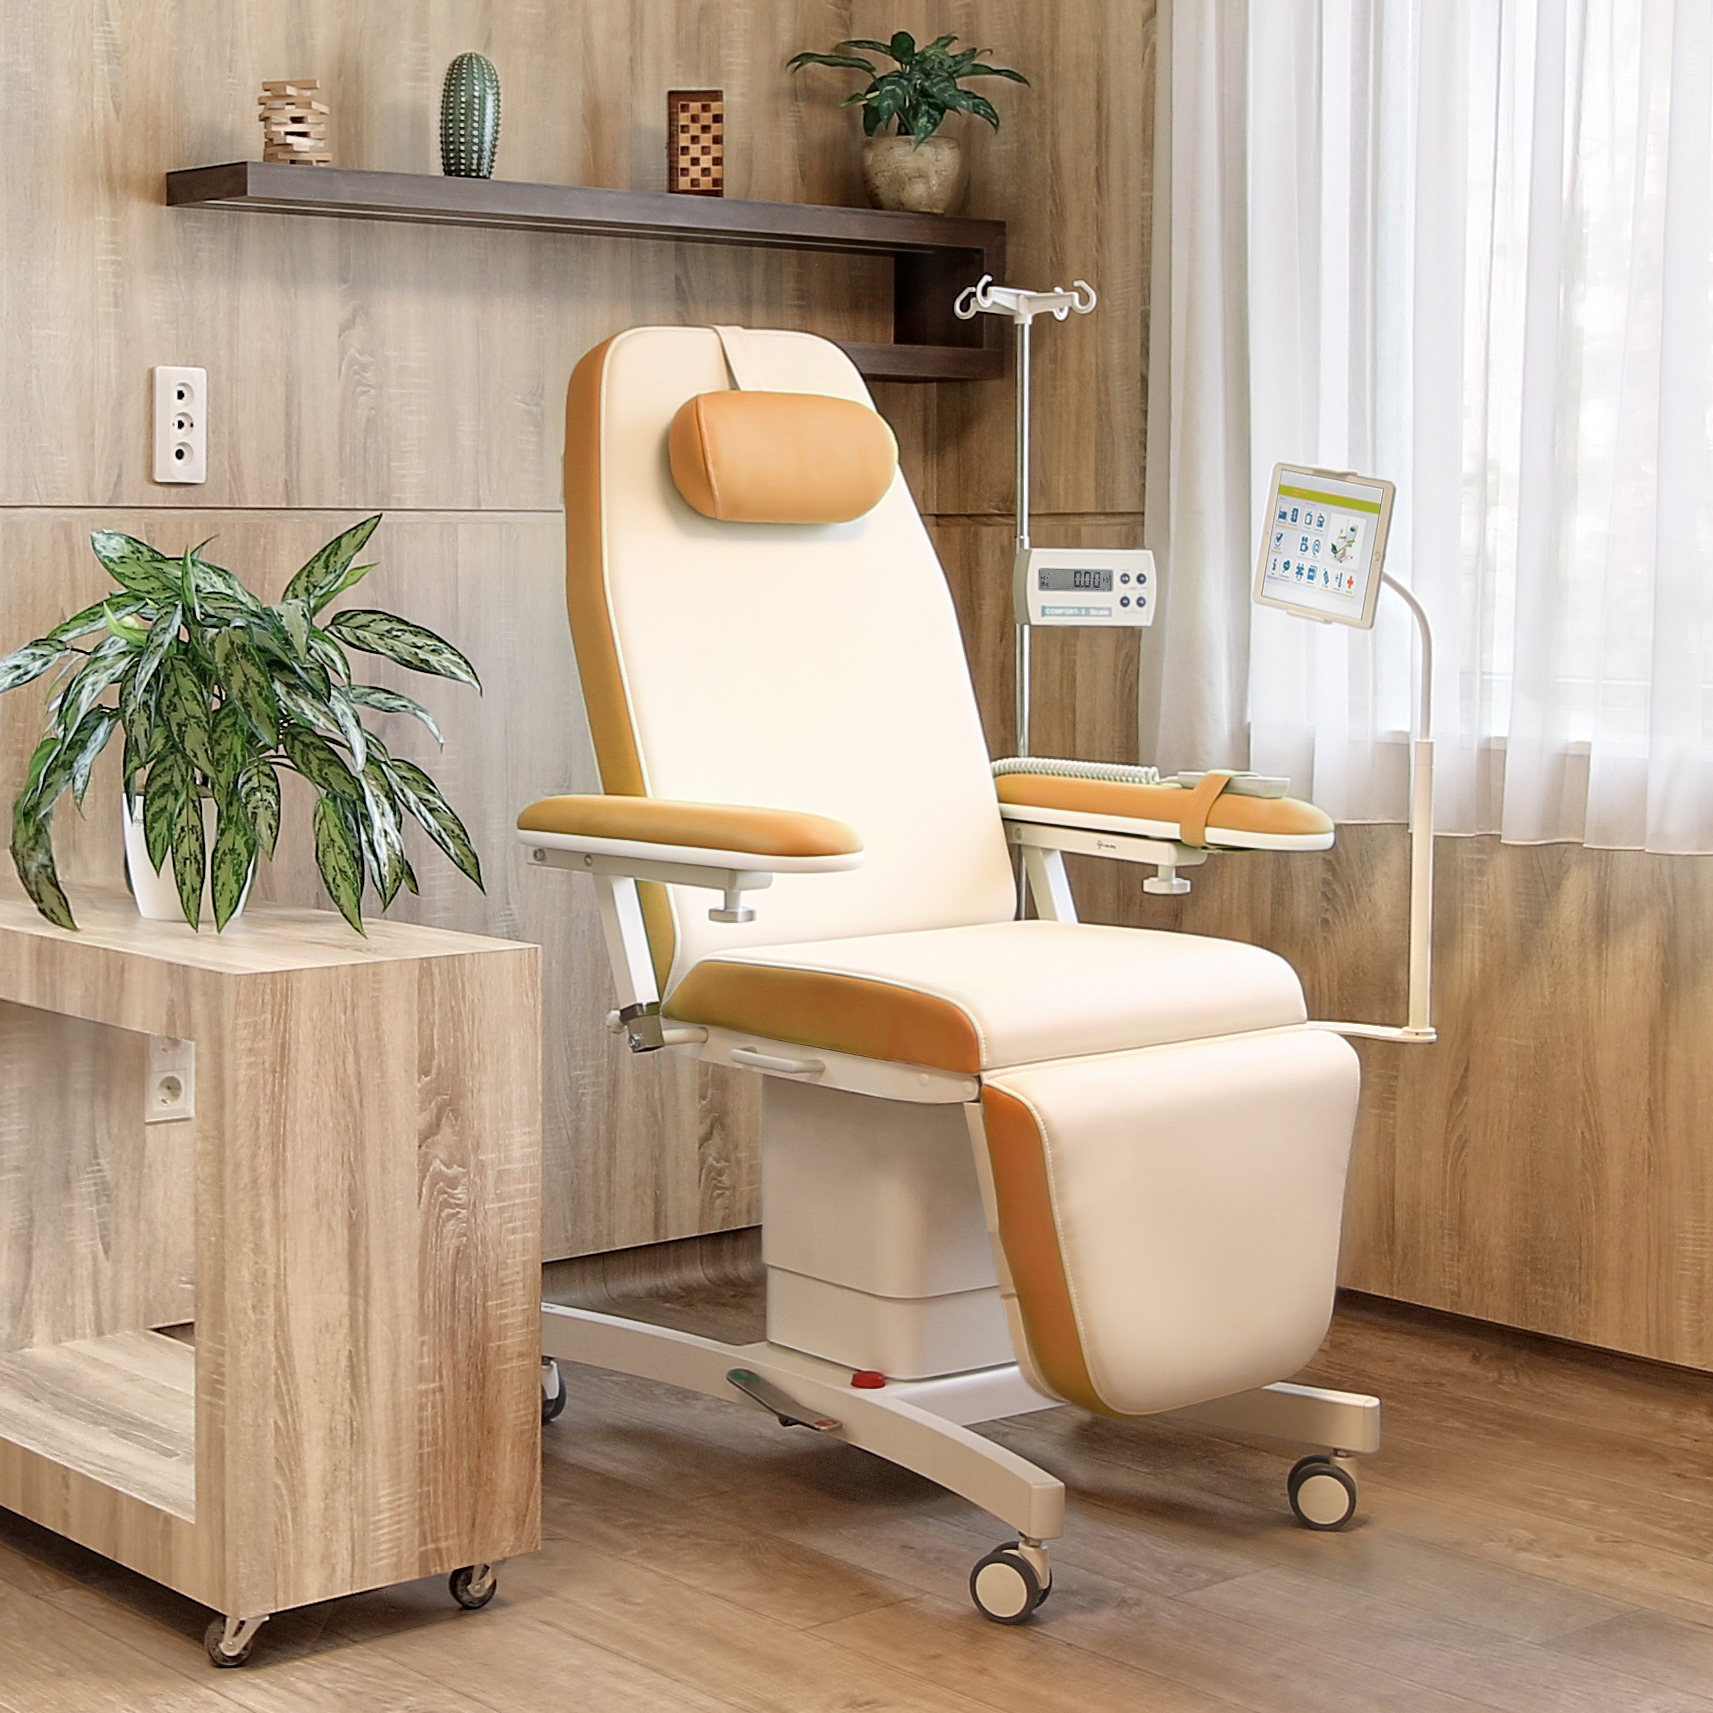 Comfort-3 Eco Dialysis-chair with tablet